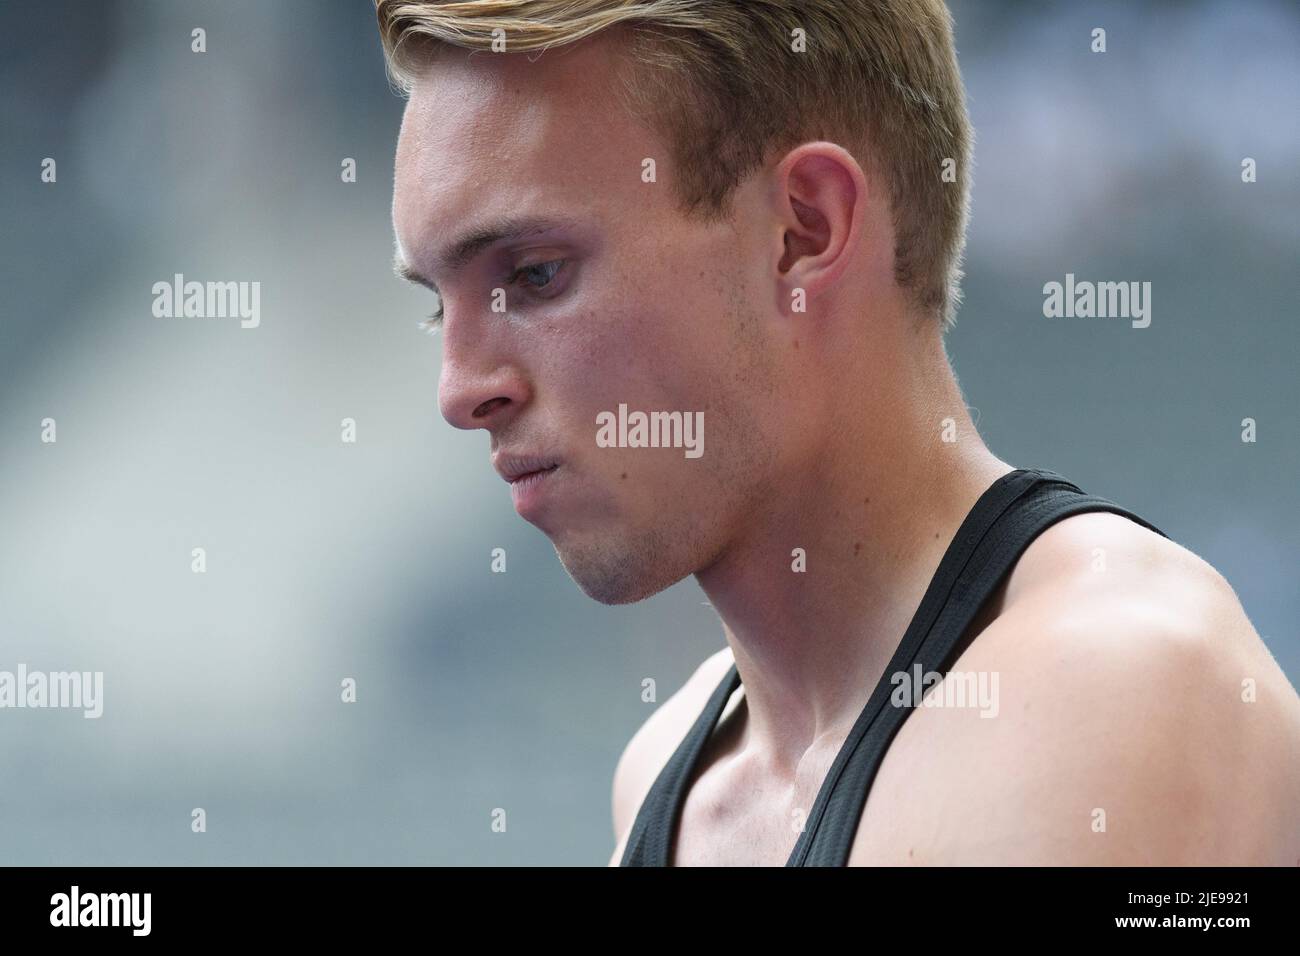 Vincente Graiani (LG Stadtwerke Muenchen) during the 2022 athletic German championship finals at Olympiastadion, Berlin.  Sven Beyrich/SPP Stock Photo